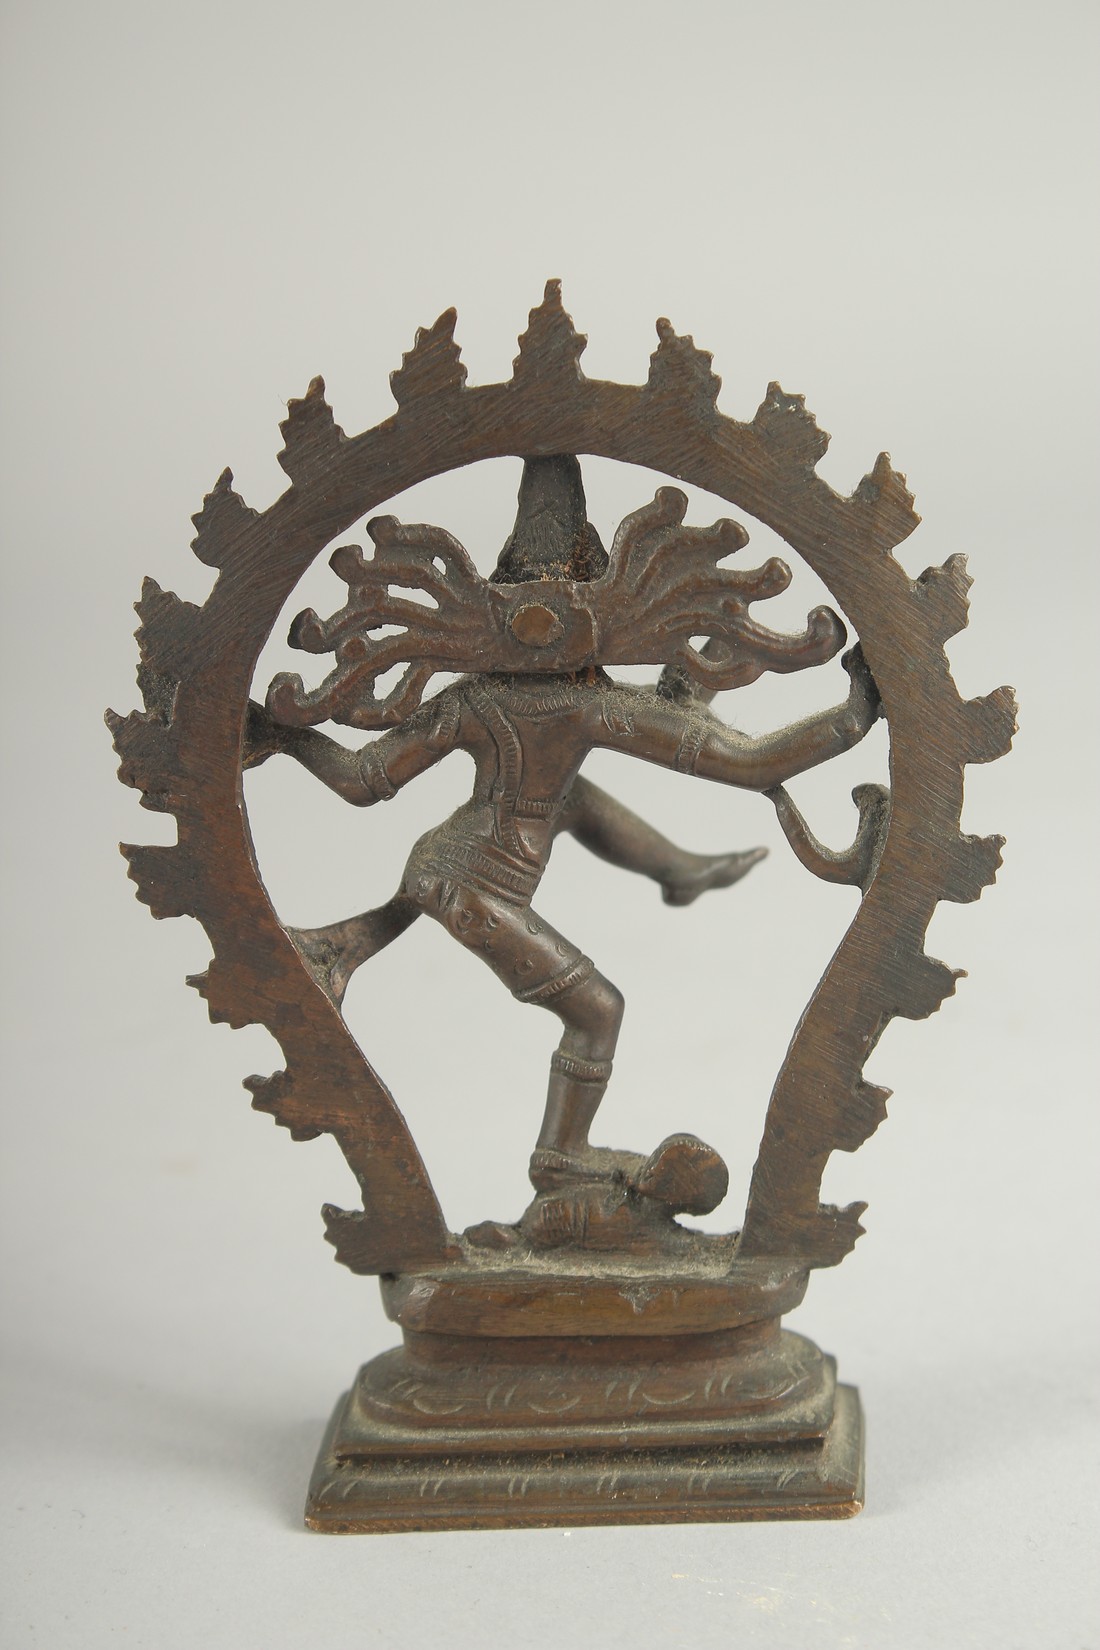 A FINE 19TH CENTURY SOUTH INDIAN BRONZE FIGURE OF SHIVA, 10cm high. - Image 2 of 3